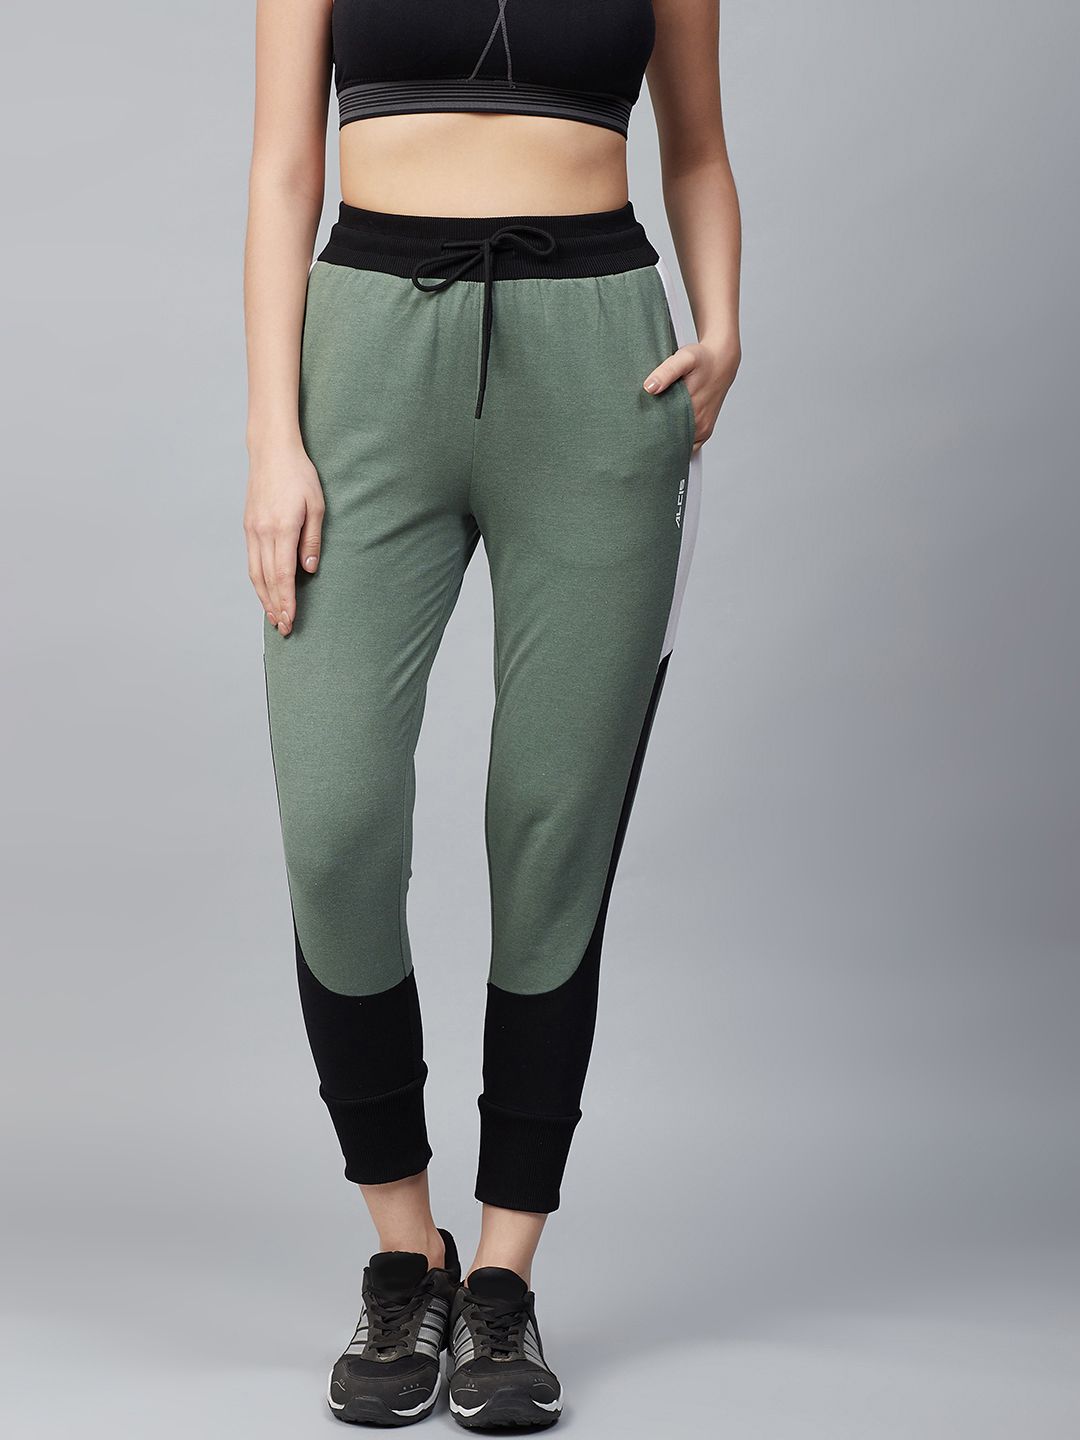 Alcis Women Olive Green & Black Solid Joggers Price in India